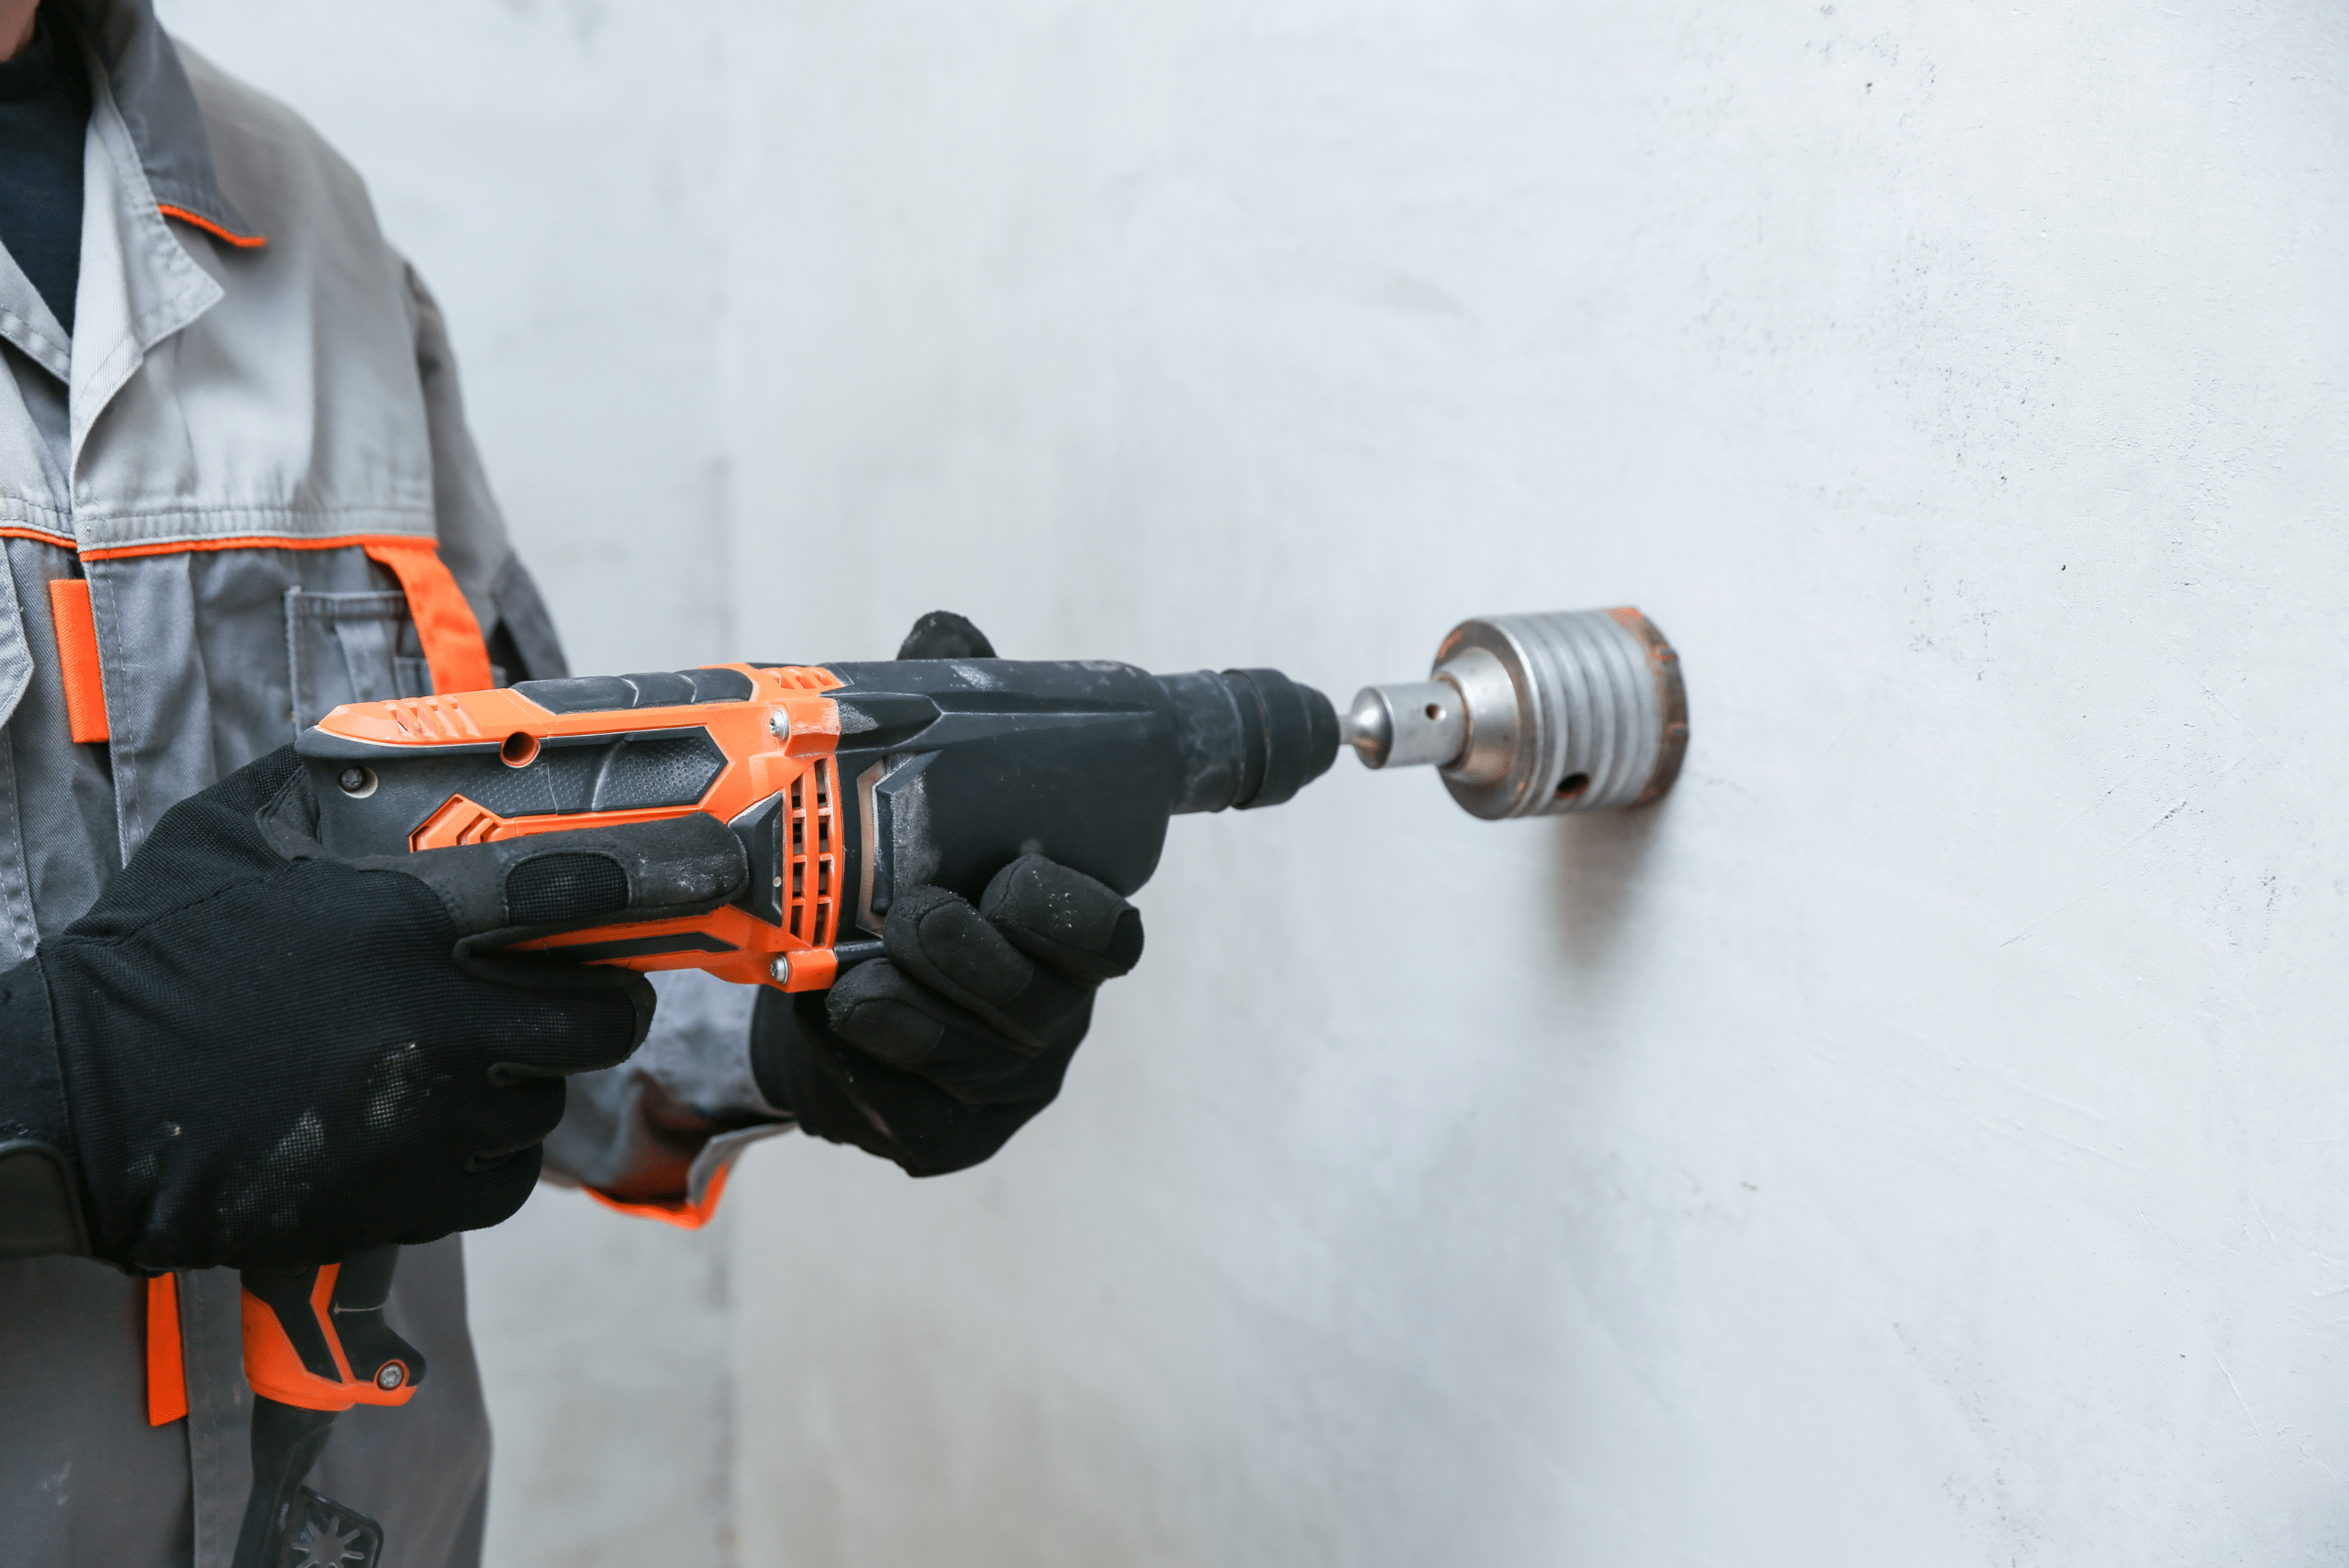 A hammer drill with circular hole bit attachment cutting a hole into the wall.